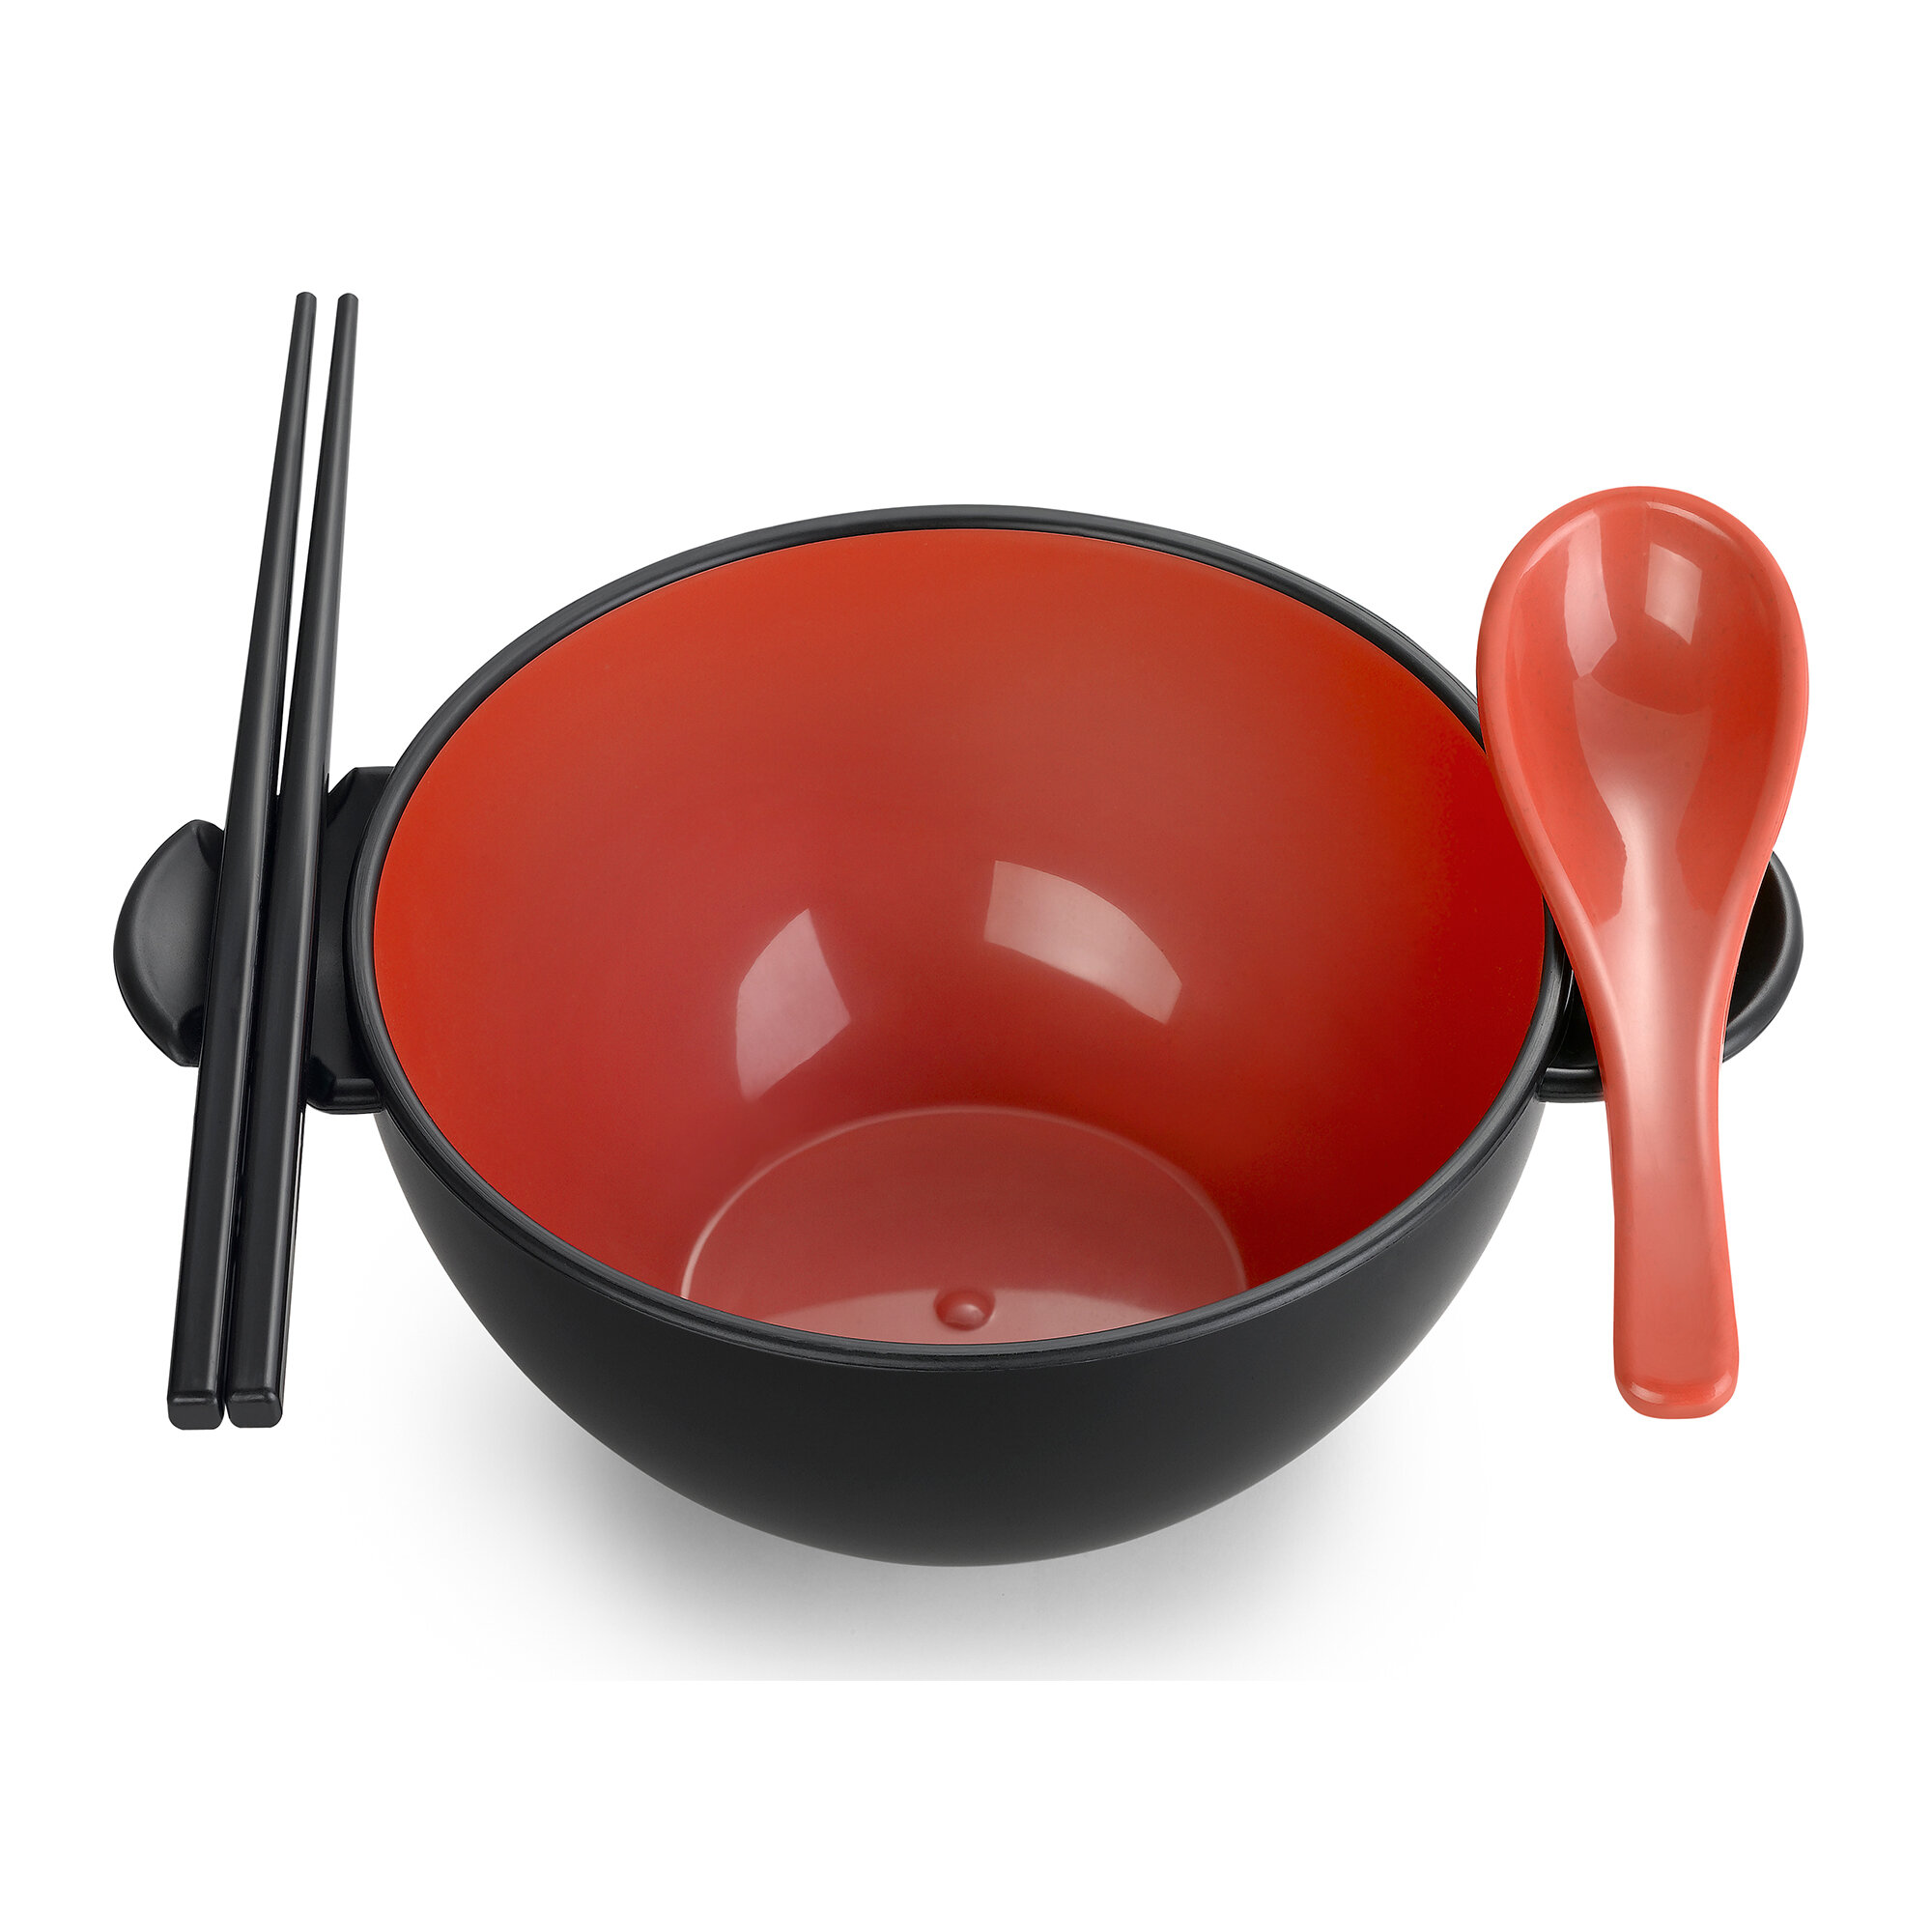 Ozeri Earth Ramen Bowl 6-Piece Set, 100% Made from A Plant - Red